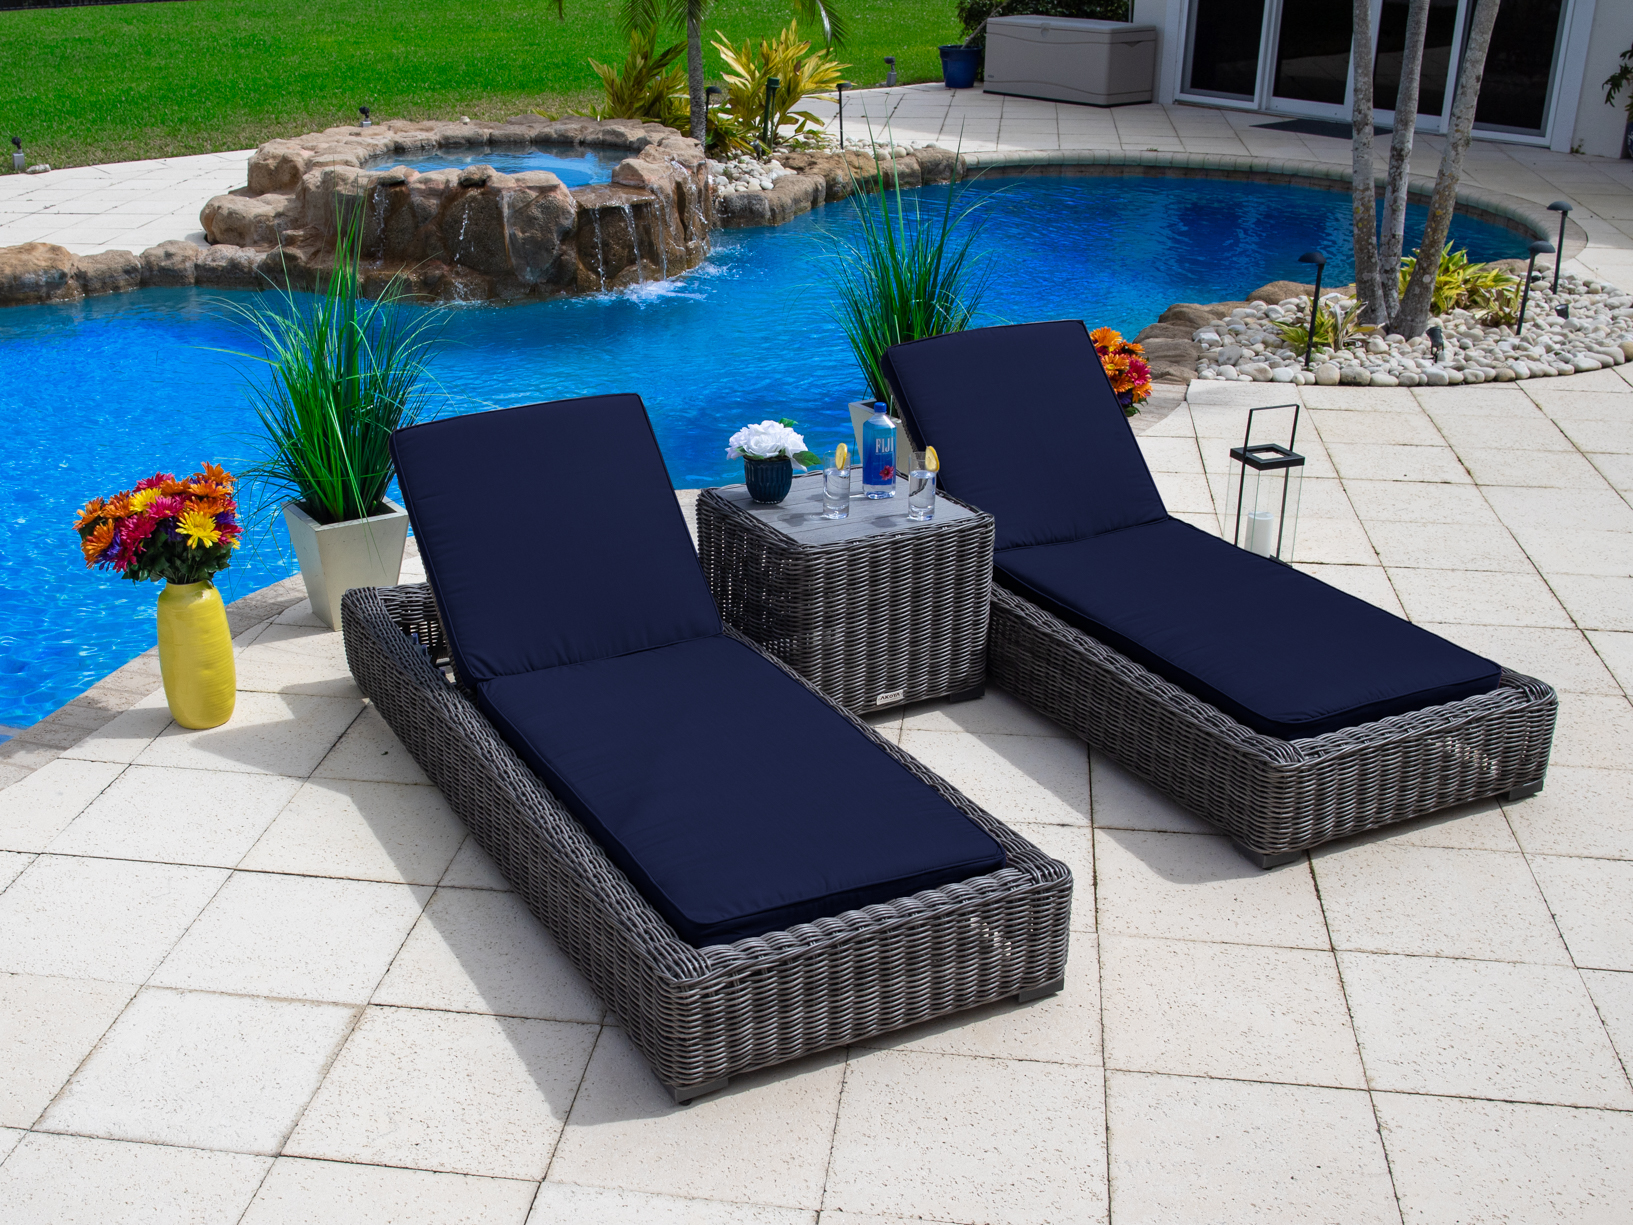 Malmo 3-Piece Resin Wicker Outdoor Patio Furniture Set Two Chaise Lounge Chairs and Side Table (Full-Round Gray Wicker, Sunbrella Canvas Navy) - image 1 of 1